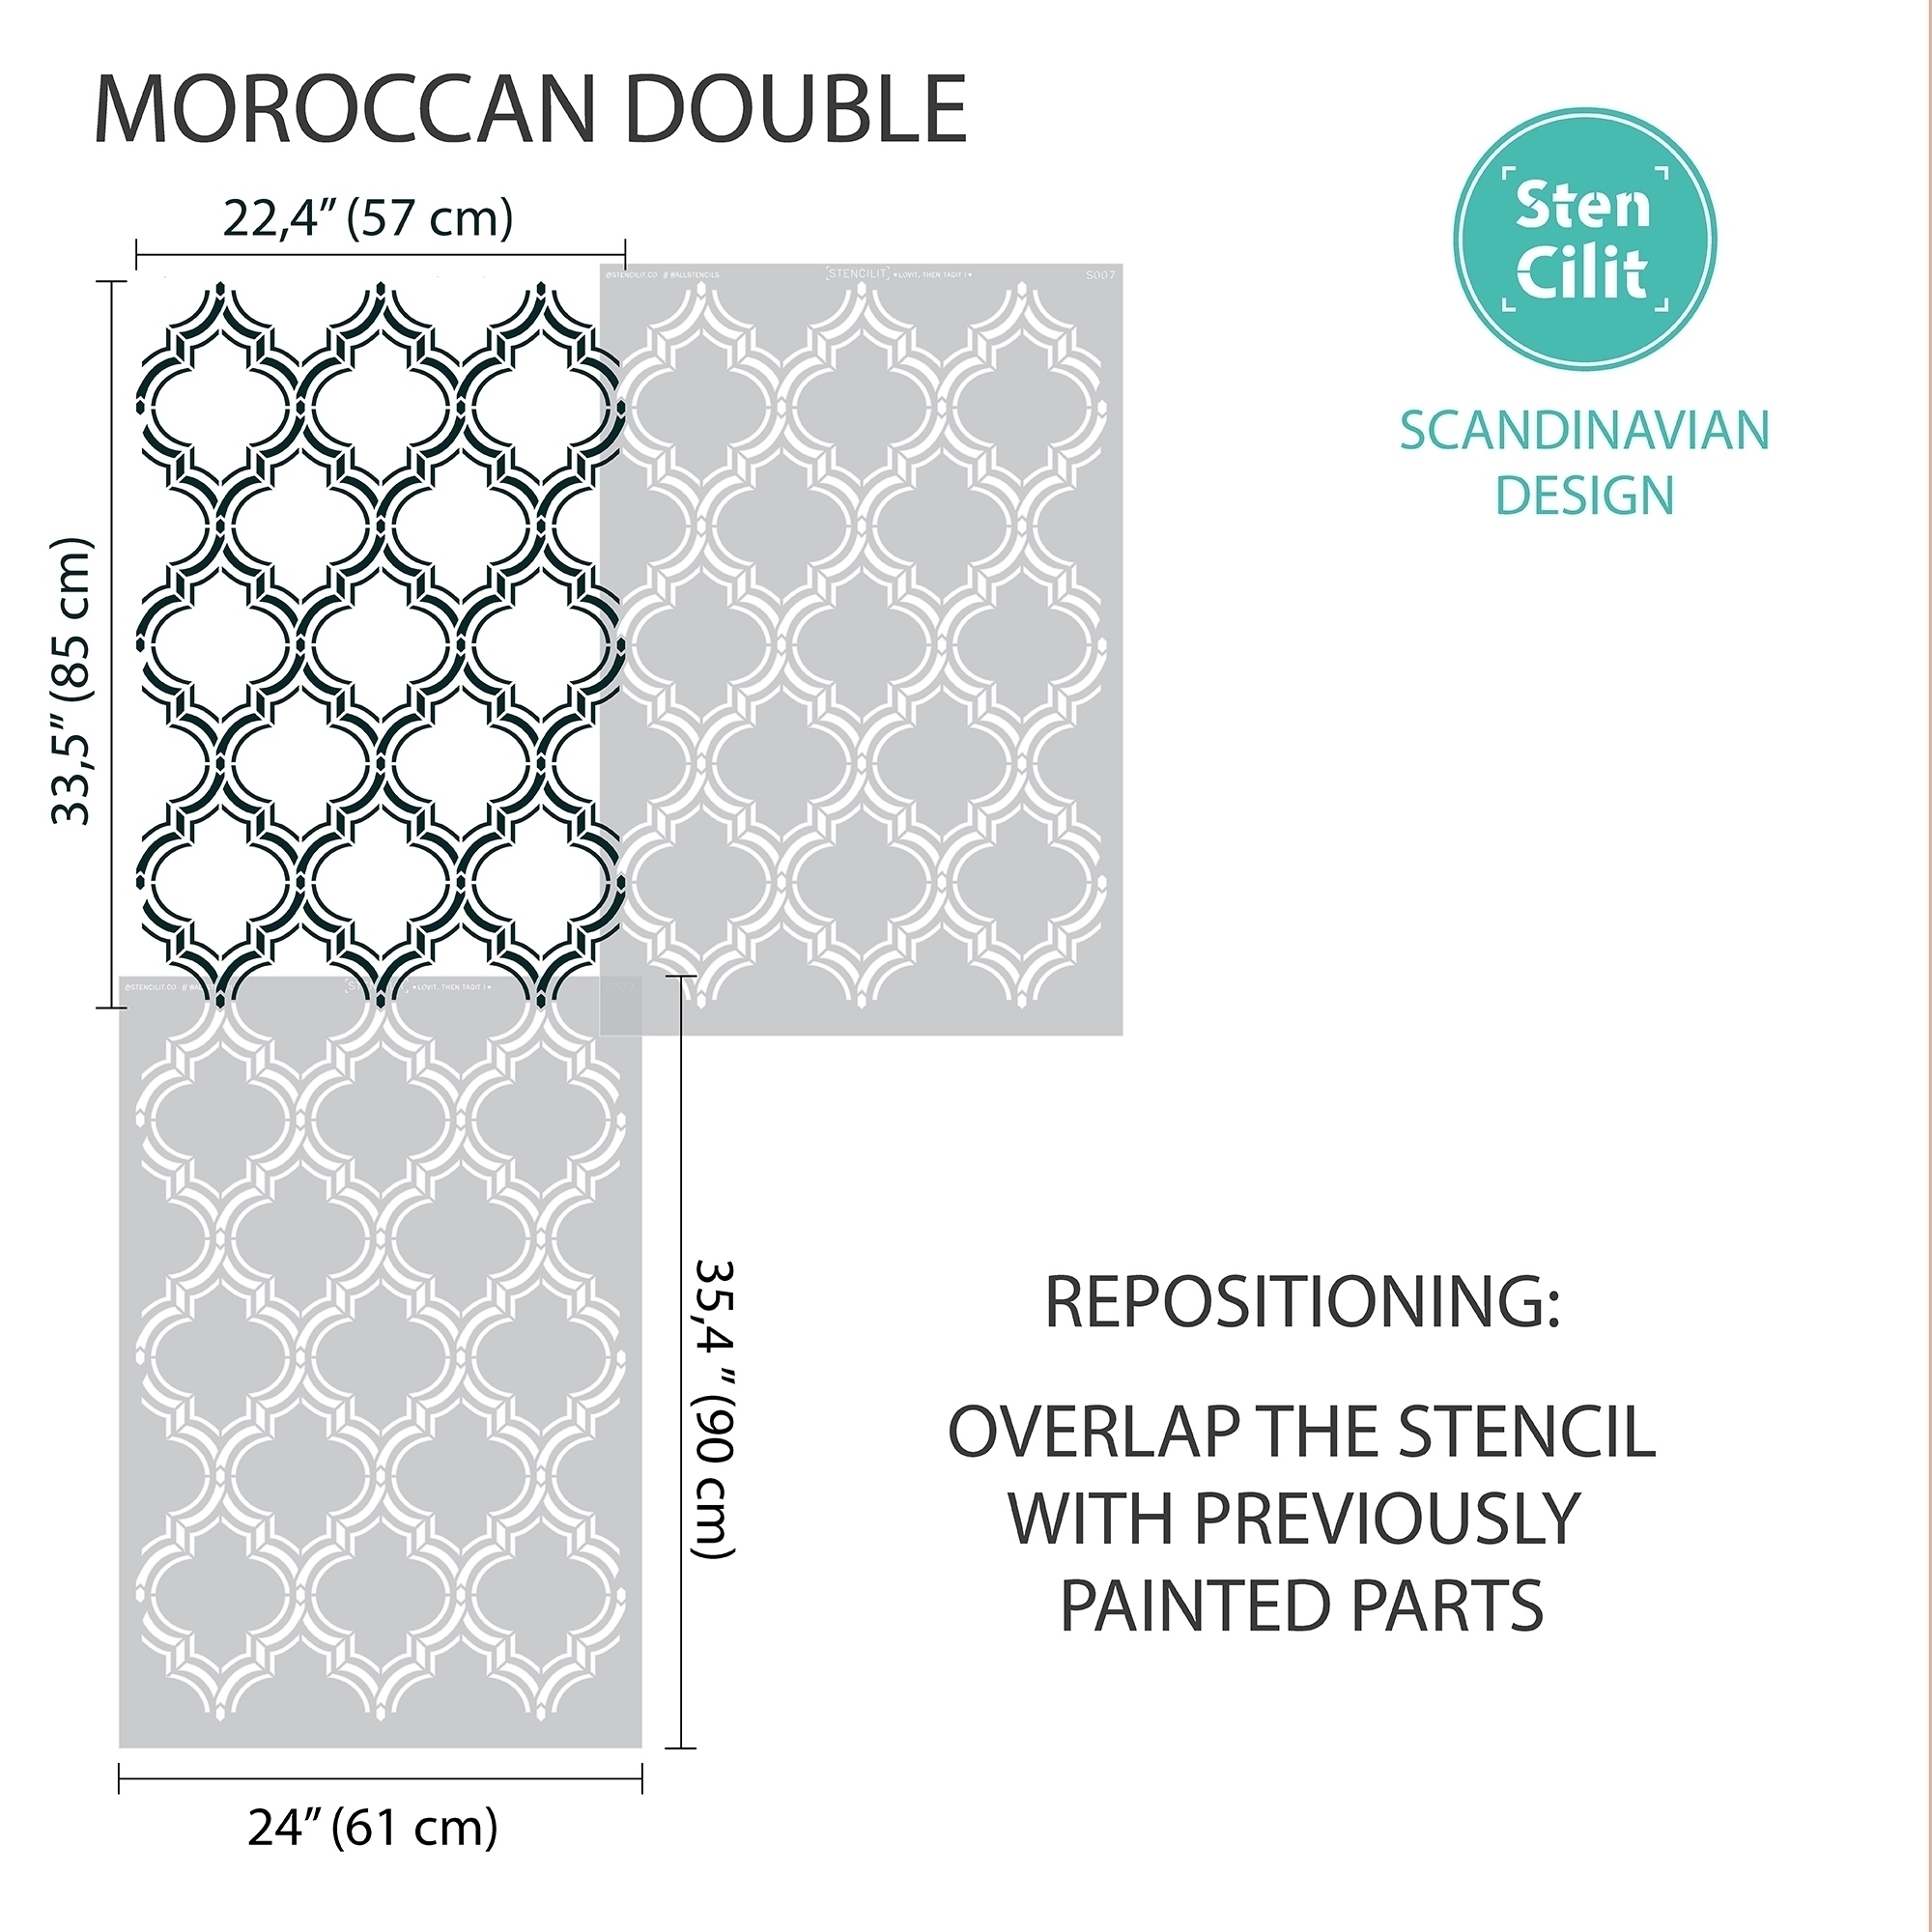 MOROCCAN DOUBLE